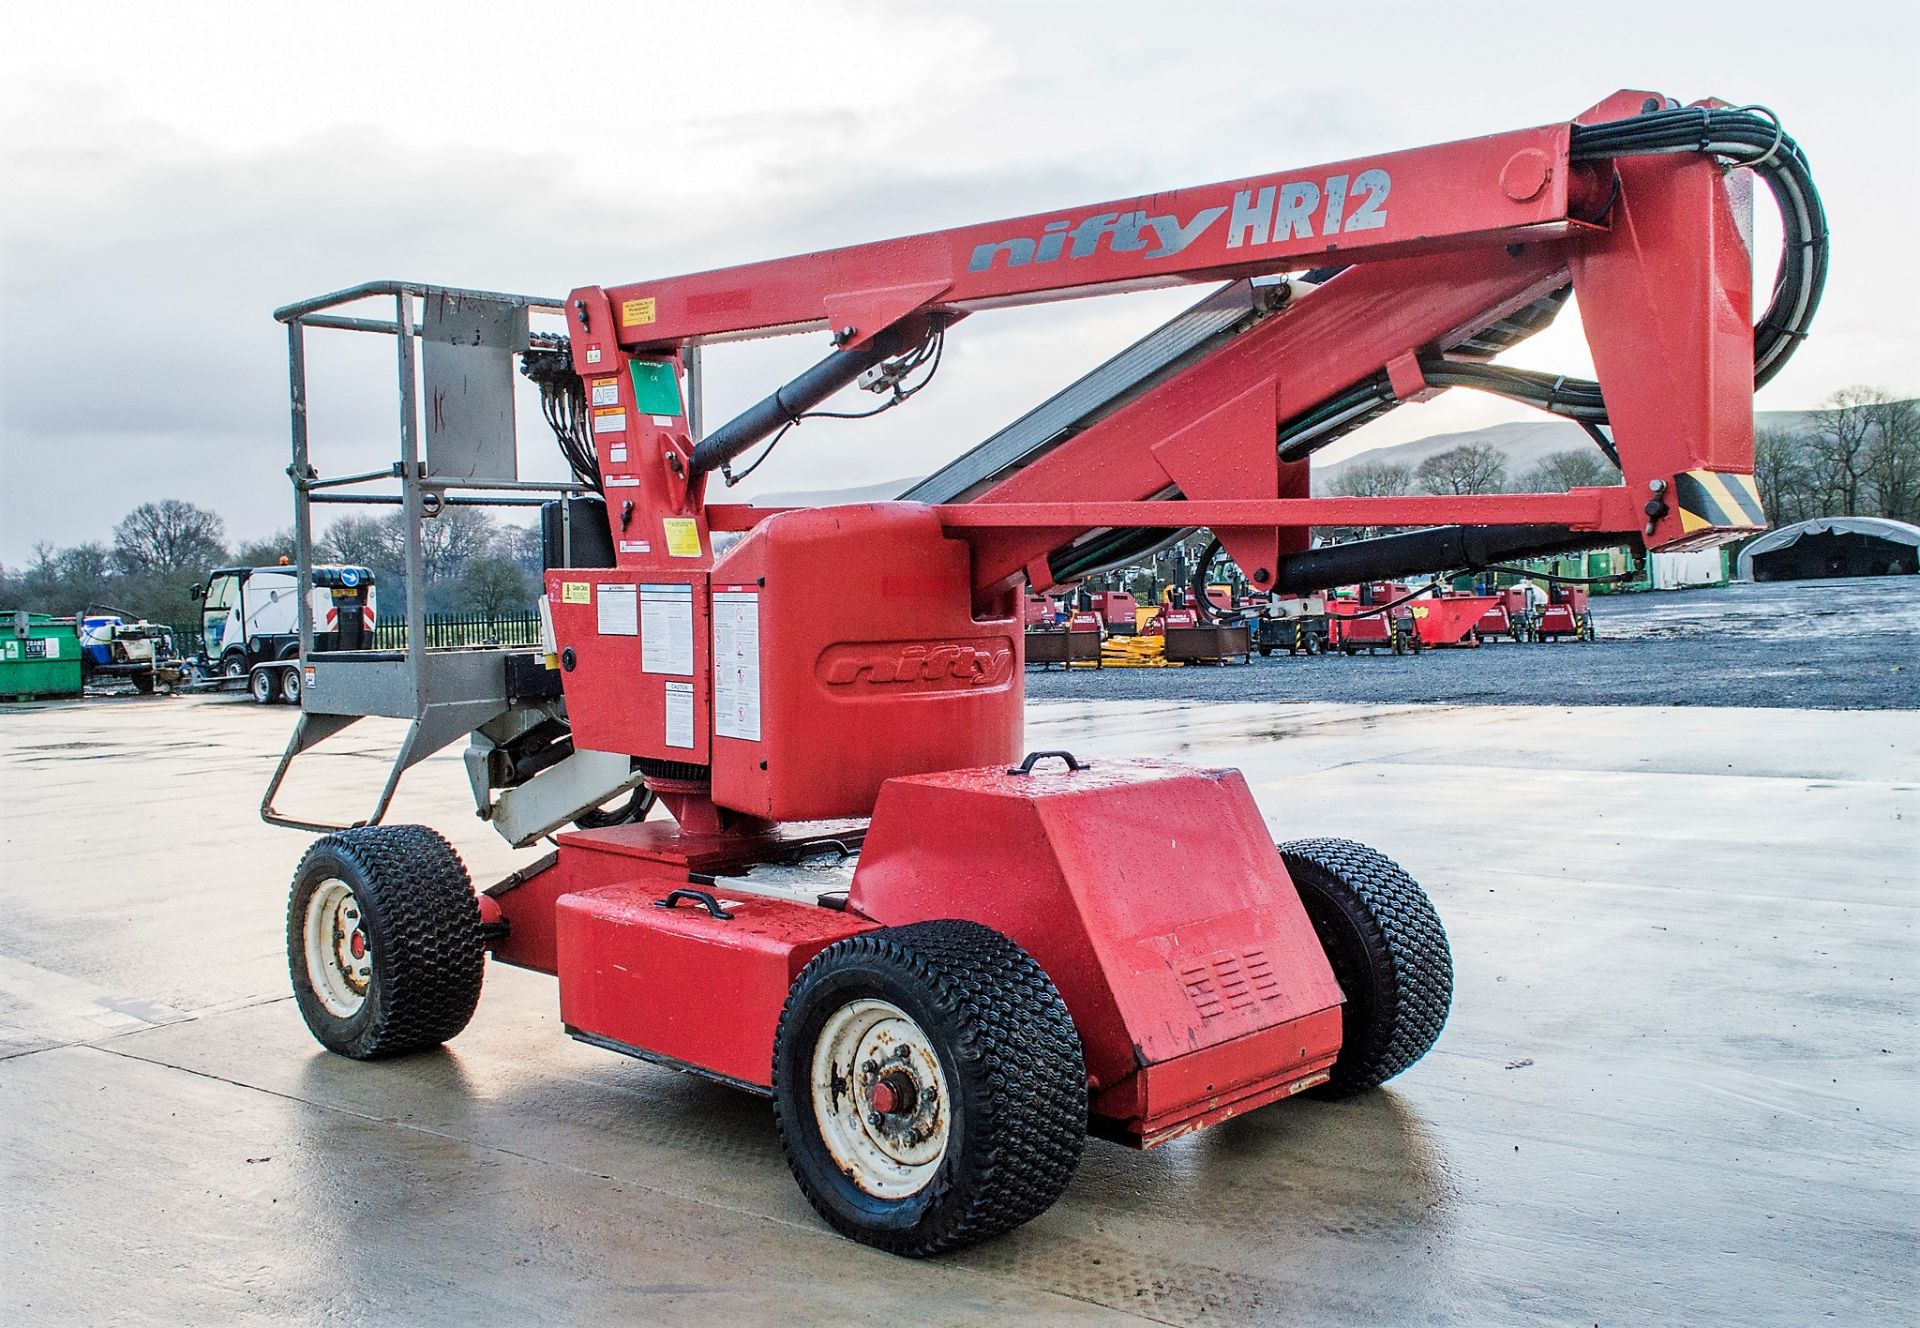 Nifty HR12 battery/diesel articulated boom access platform Year: 2010 S/N: 19297 - Image 4 of 18